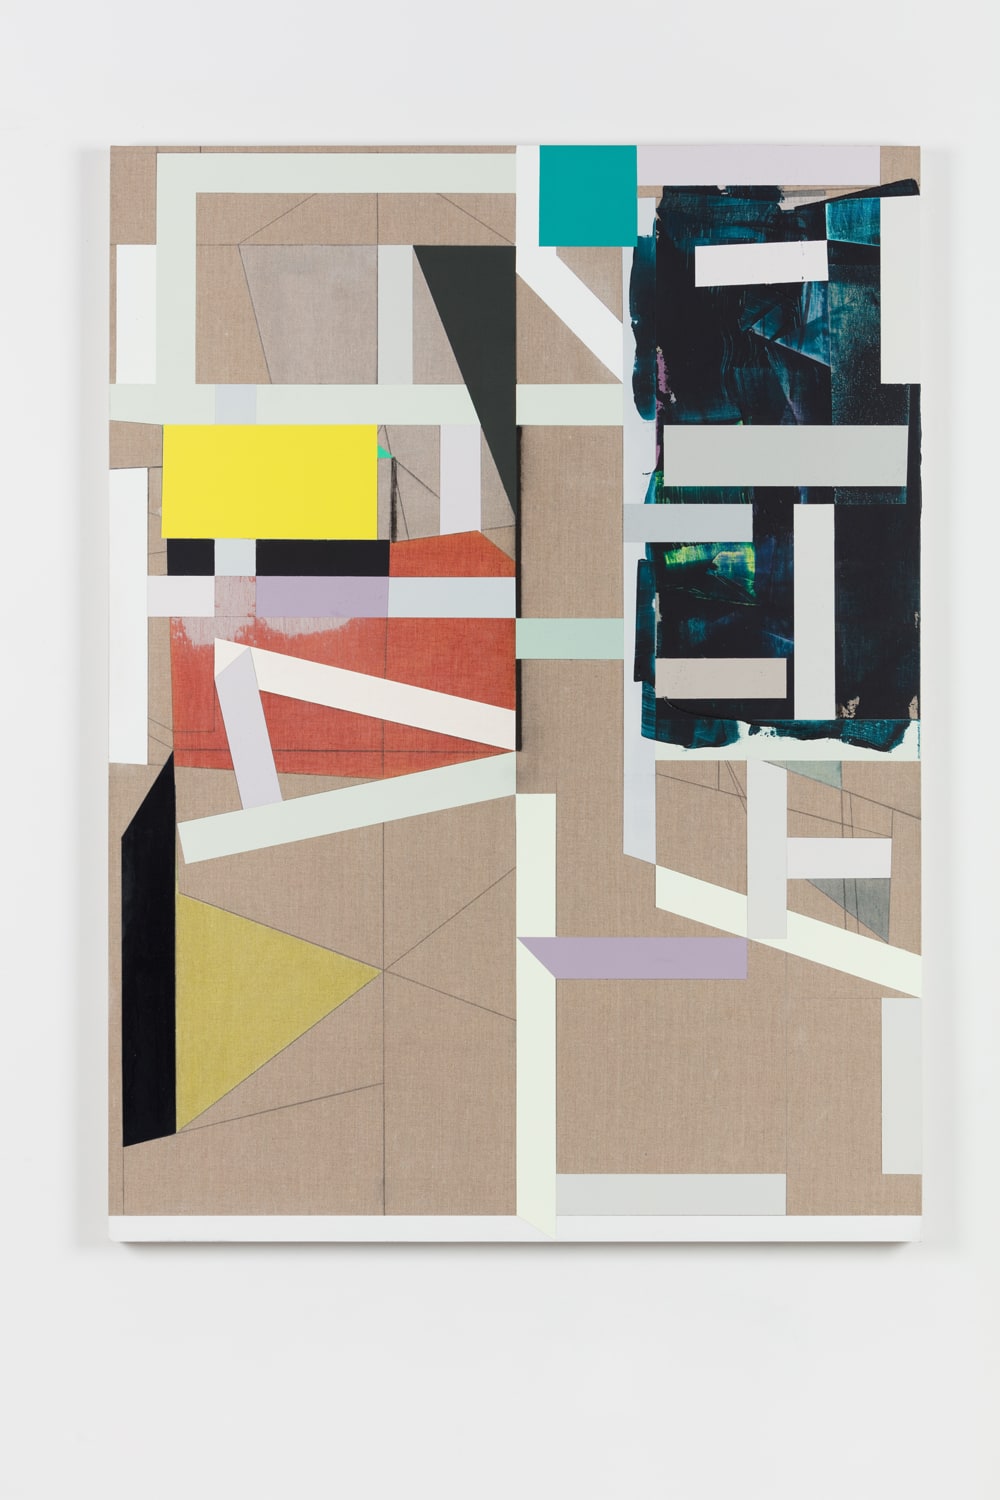 Andrew Bick, Variant t-s [flat and tilted] #2 v3, 2013-2018